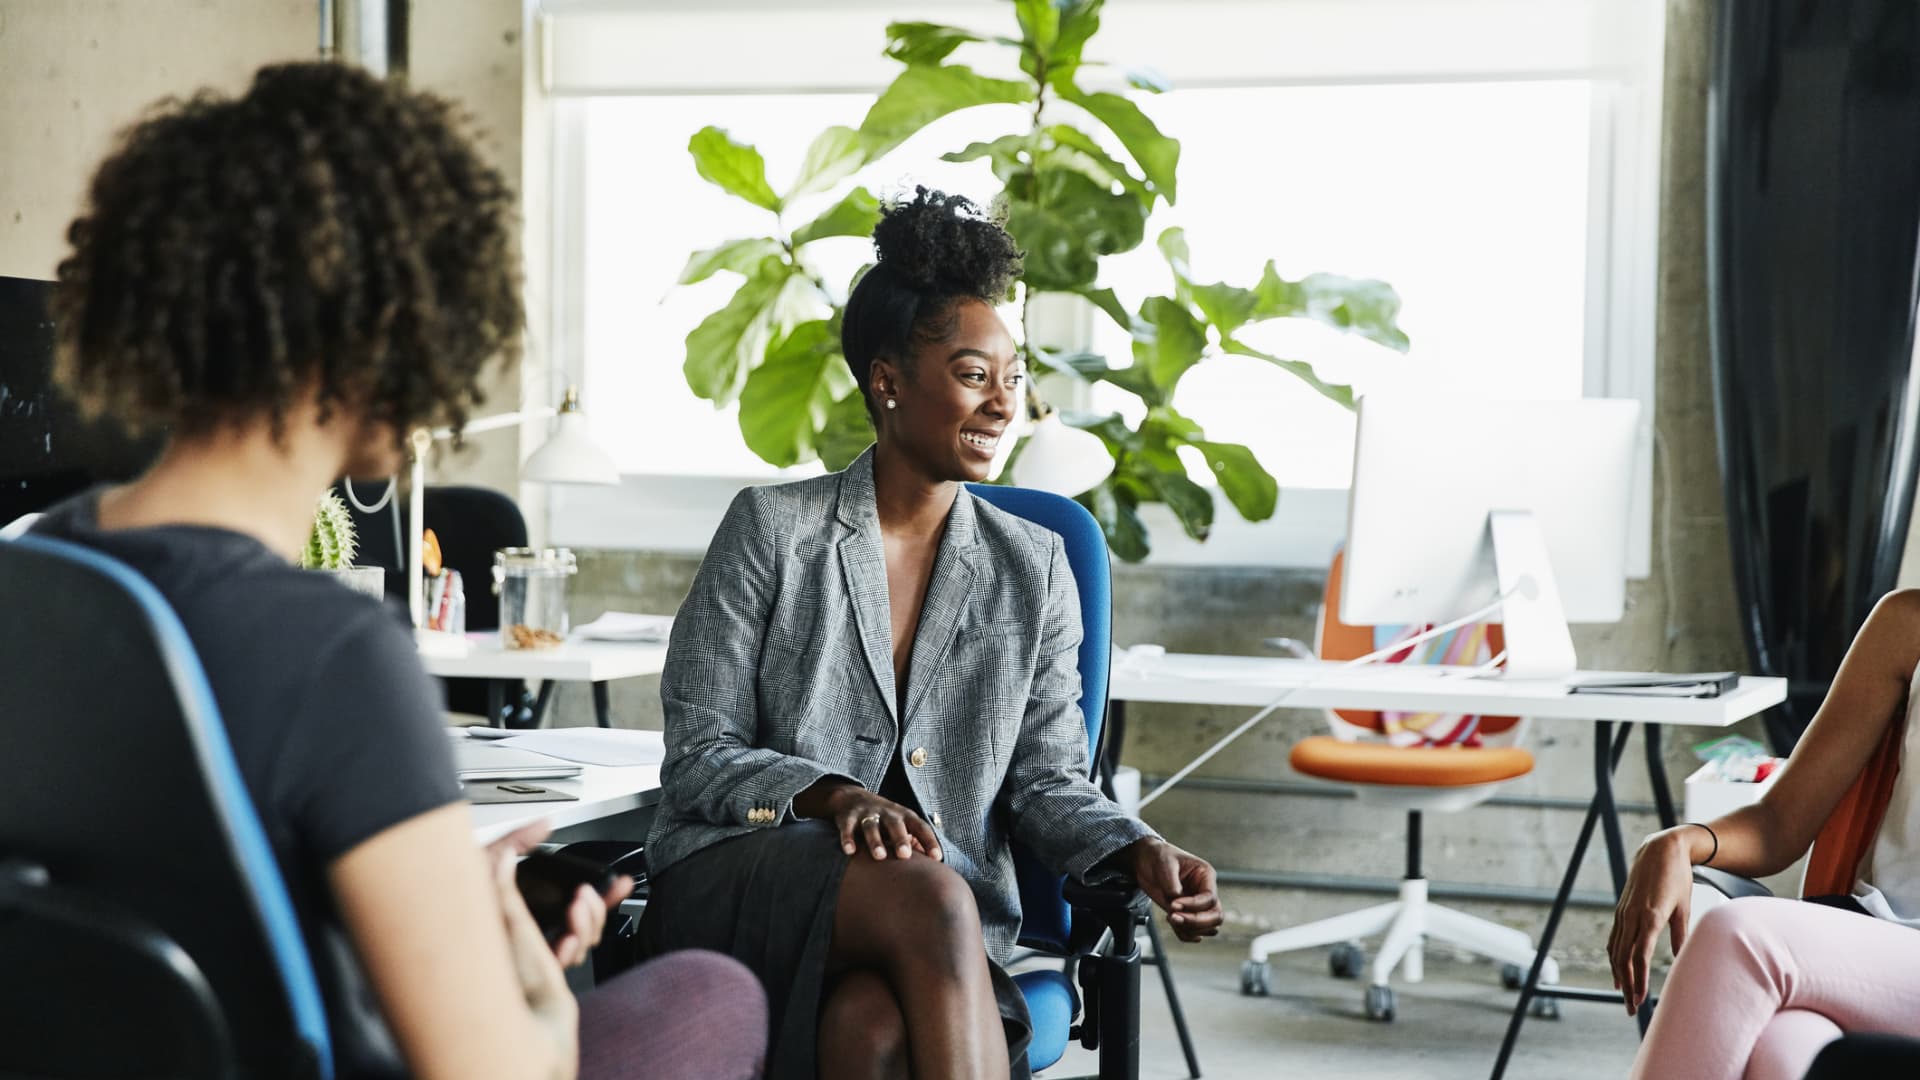 Black women are the fastest-growing group of entrepreneurs in the U.S.